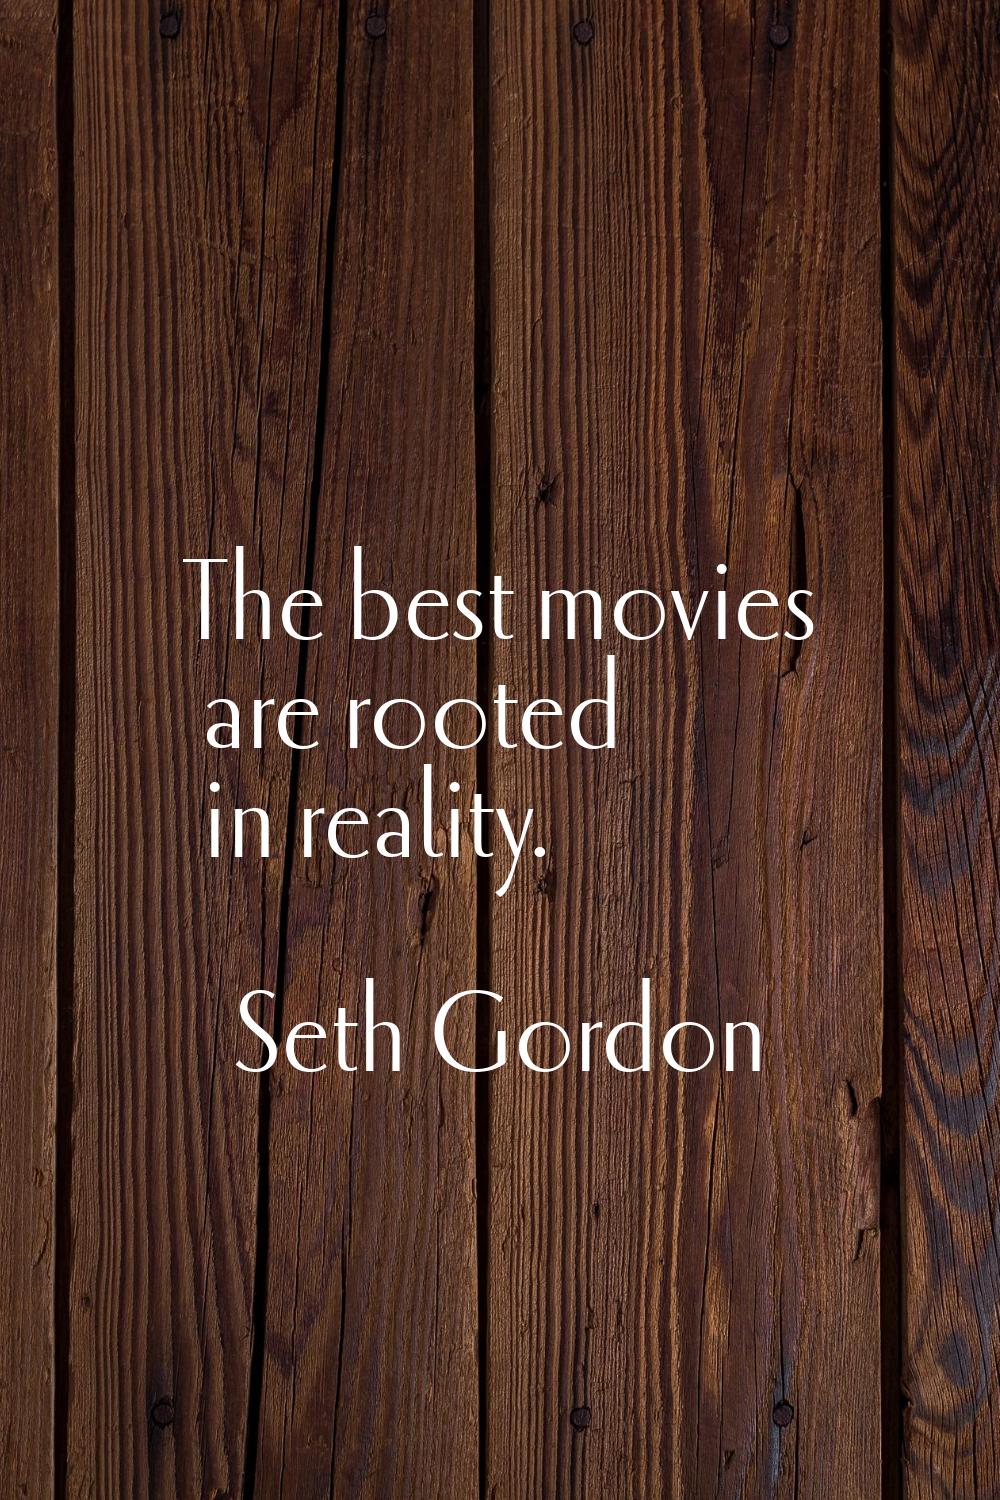 The best movies are rooted in reality.